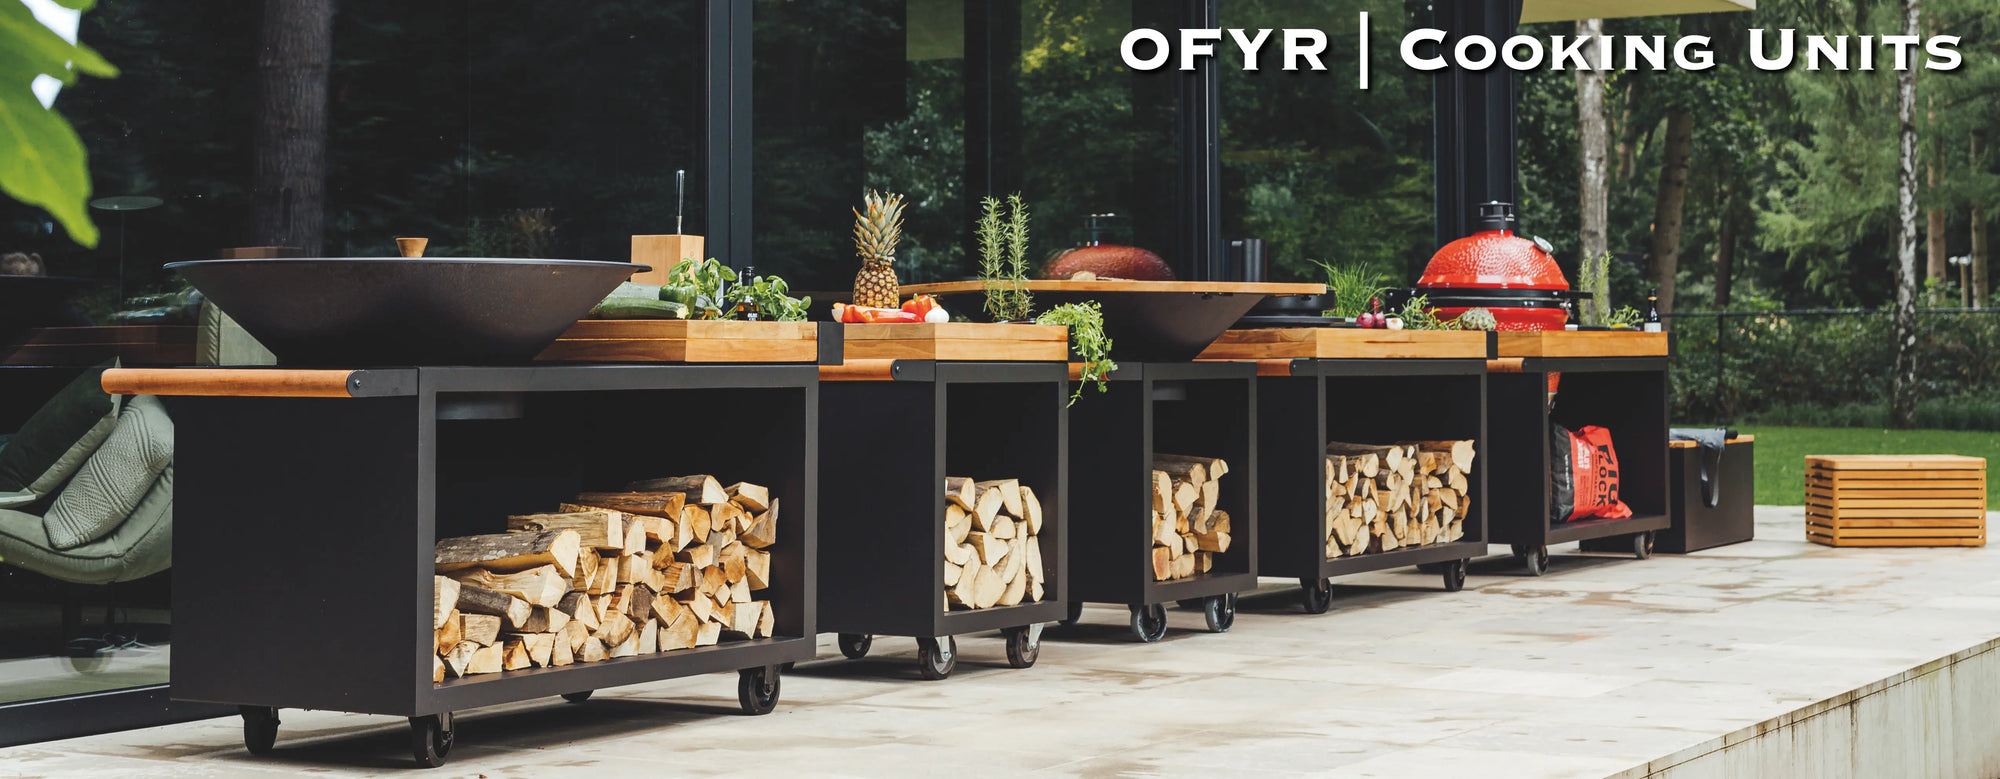 OFYR Cooking Units